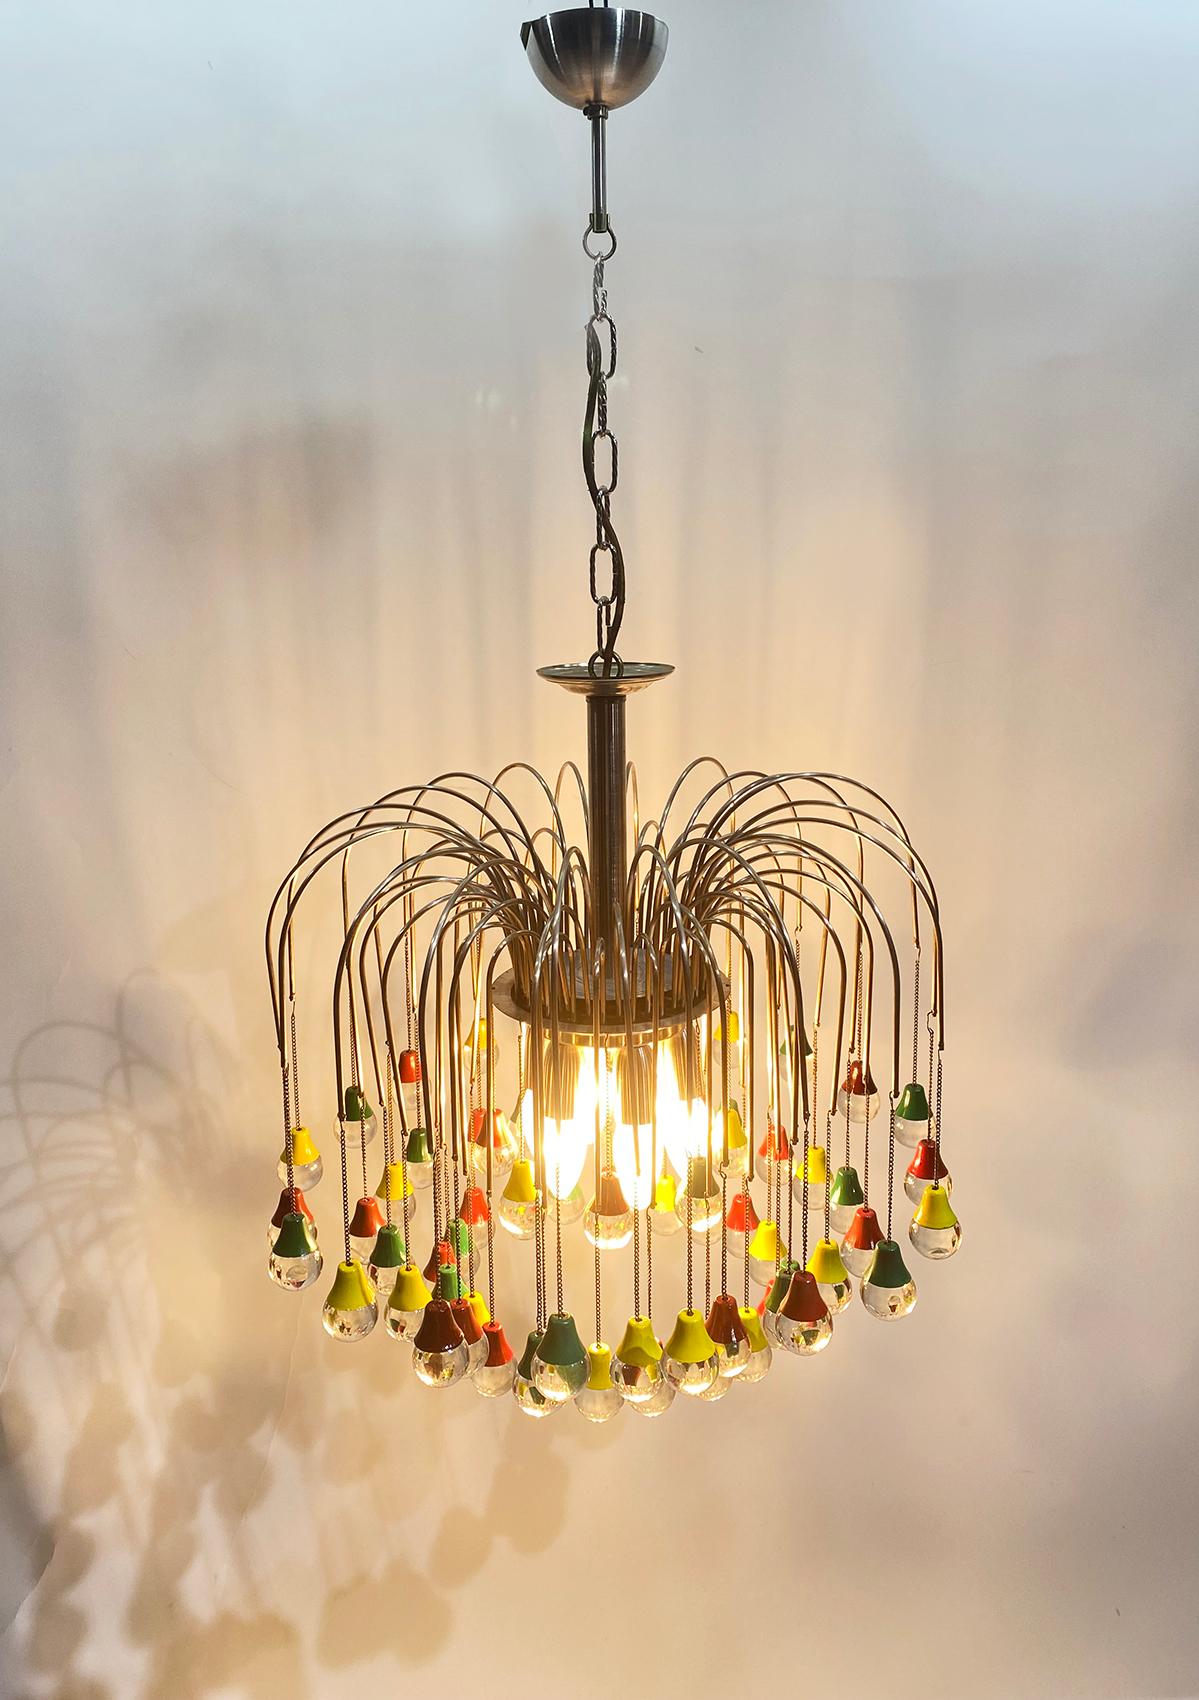 Magnificent teardrop-shaped chandelier made in France in the 1950s.
The Teardrop are held by colored caps in green, red and yellow, with a silver plated structure
The crystal teardrop refracts light in a beautiful way. It fills the room with a